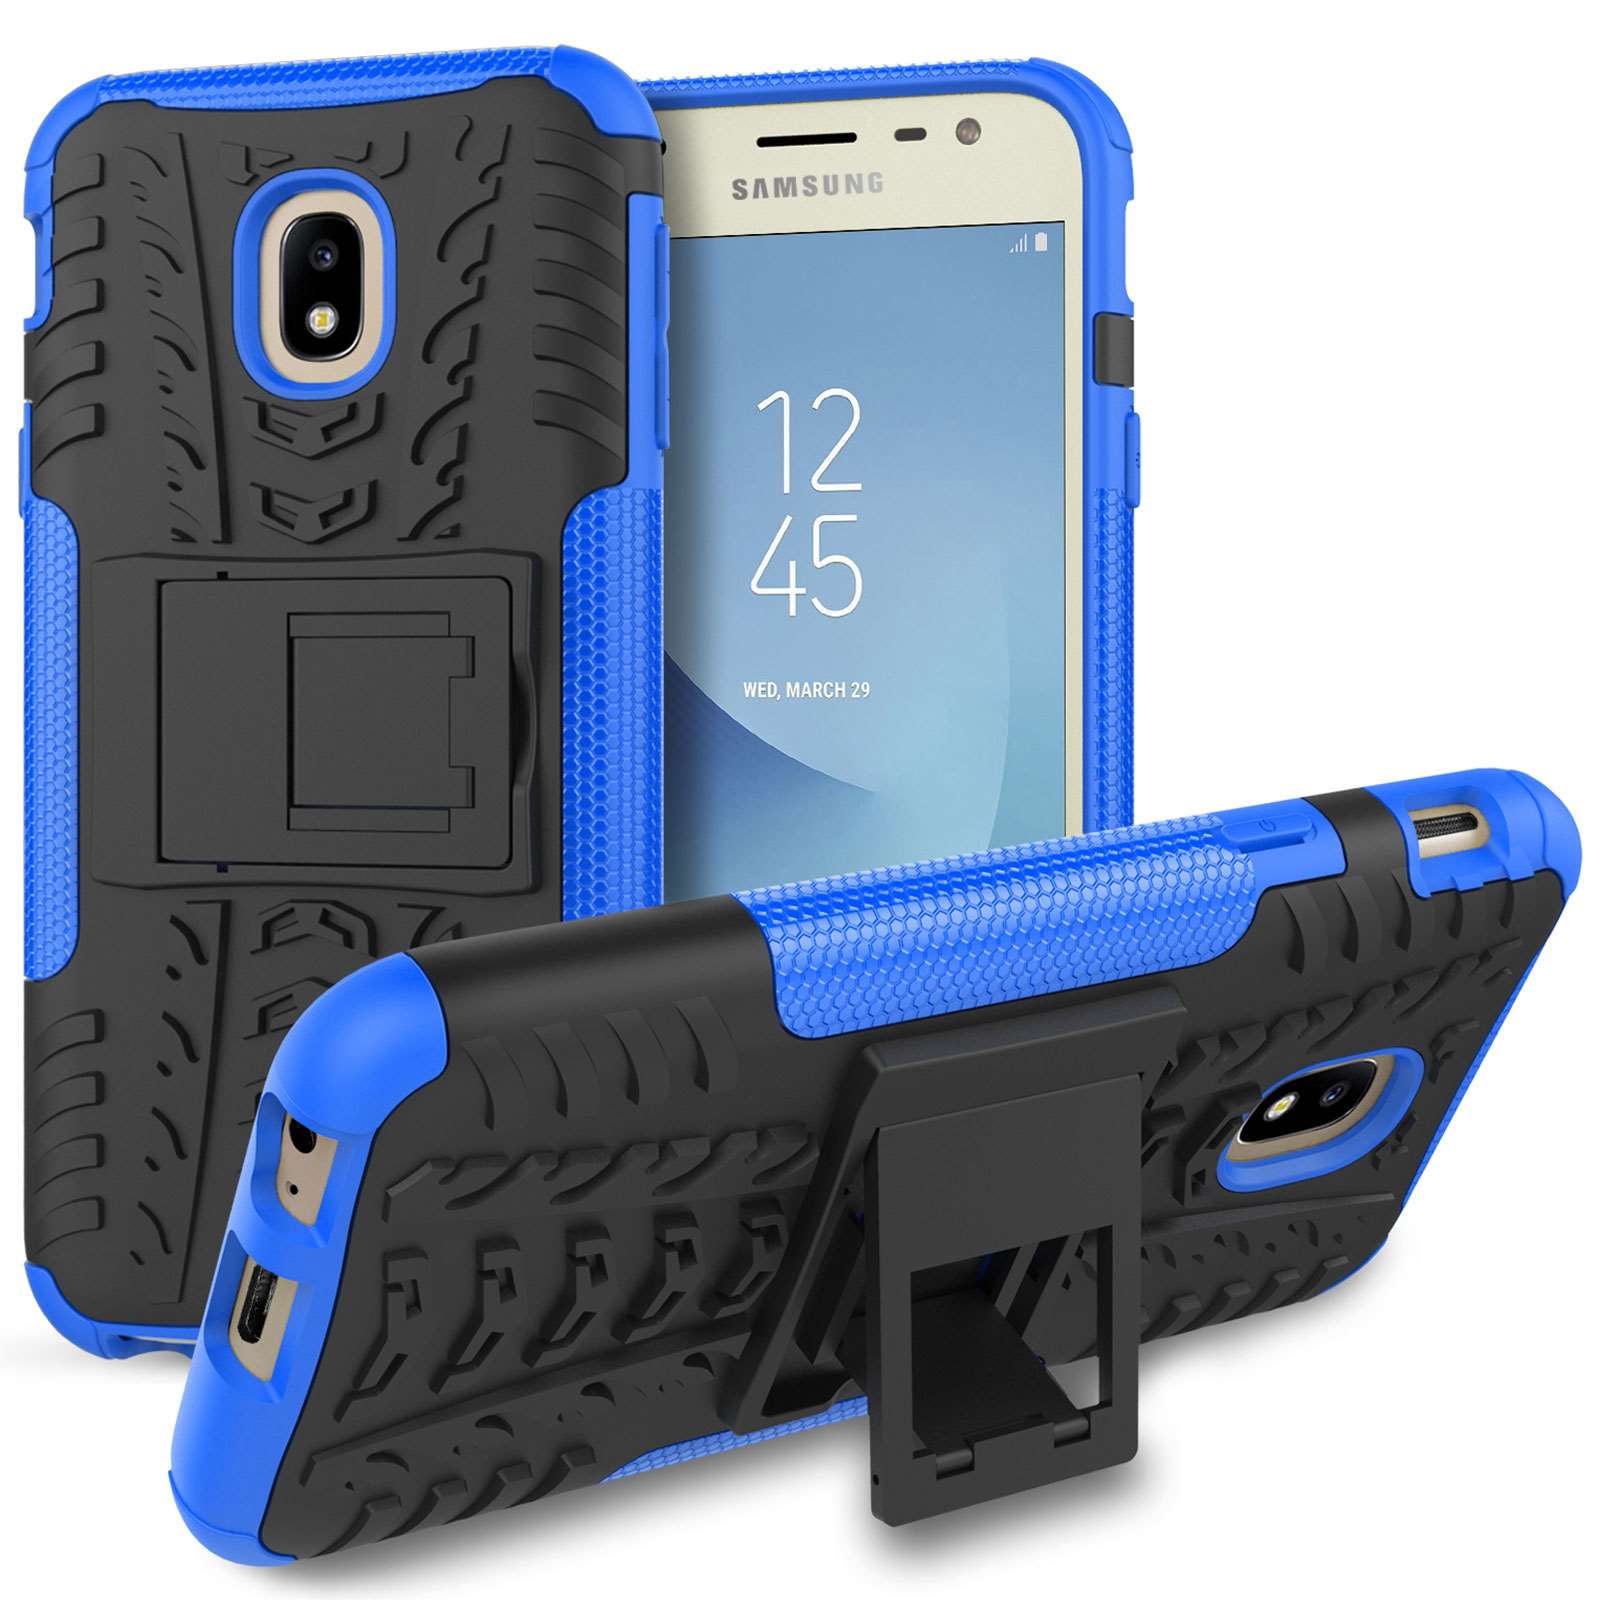 Samsung Galaxy J3 17 Armour Case With Stand Black Blue